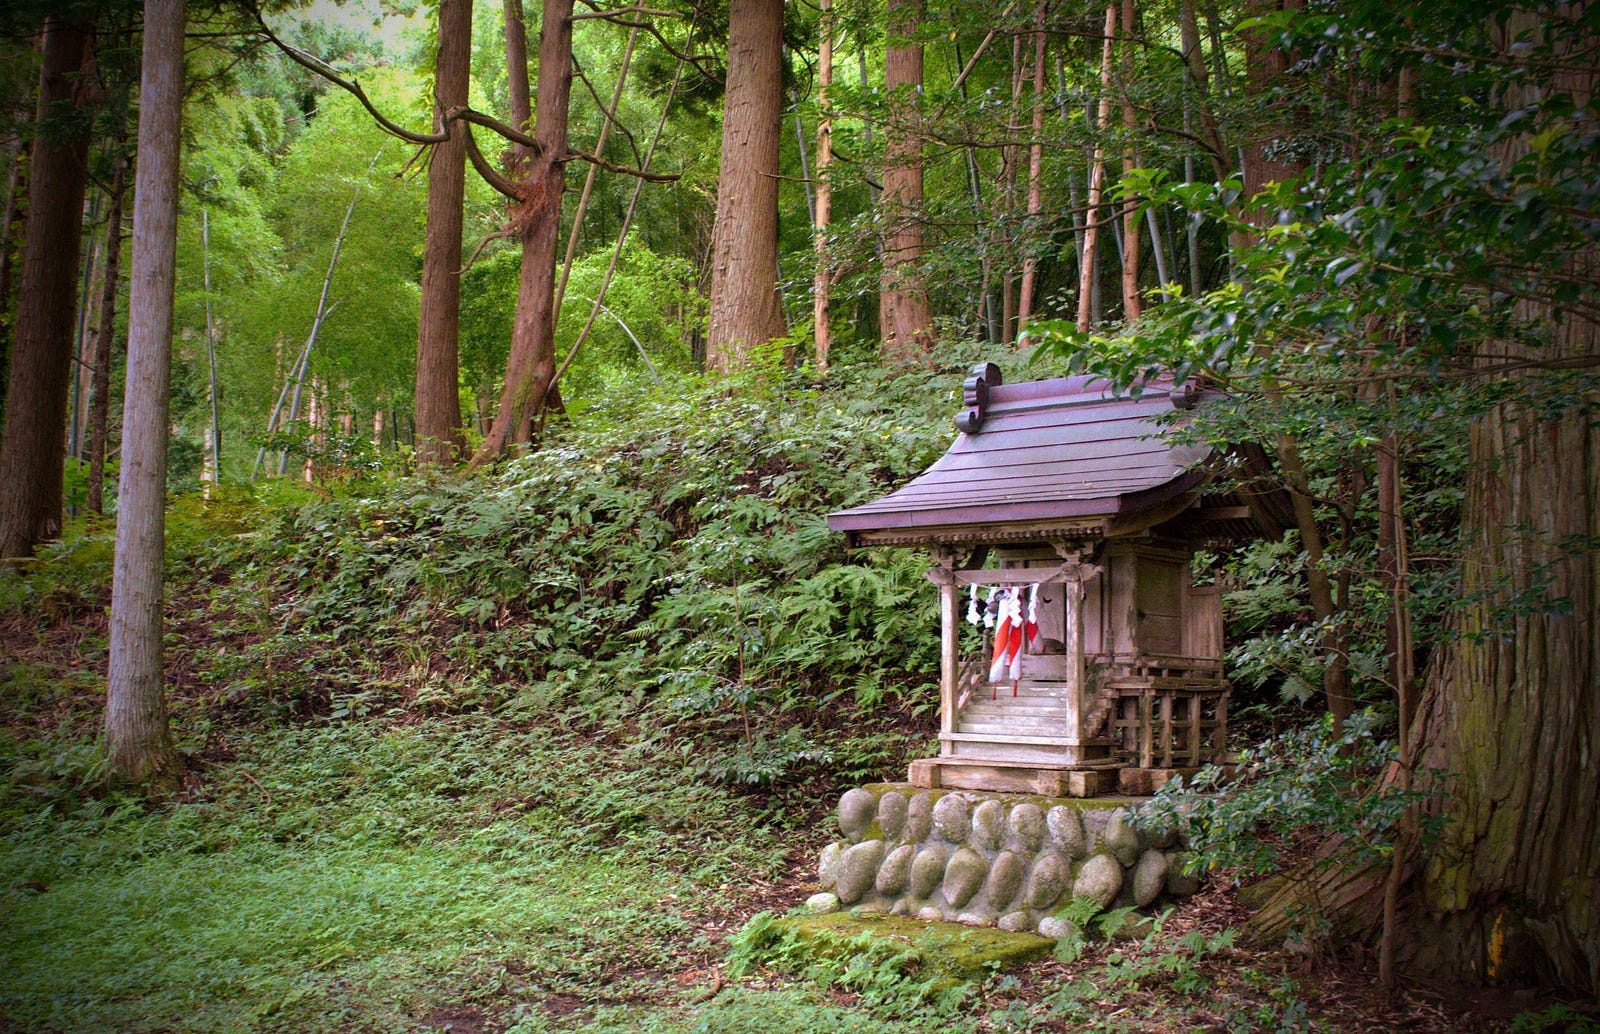 The small shrine of Minagawa Shrine sits atop a rock foundation with a lush green forest in the background near the Shishihata Trailhead up Mt. Fujikura